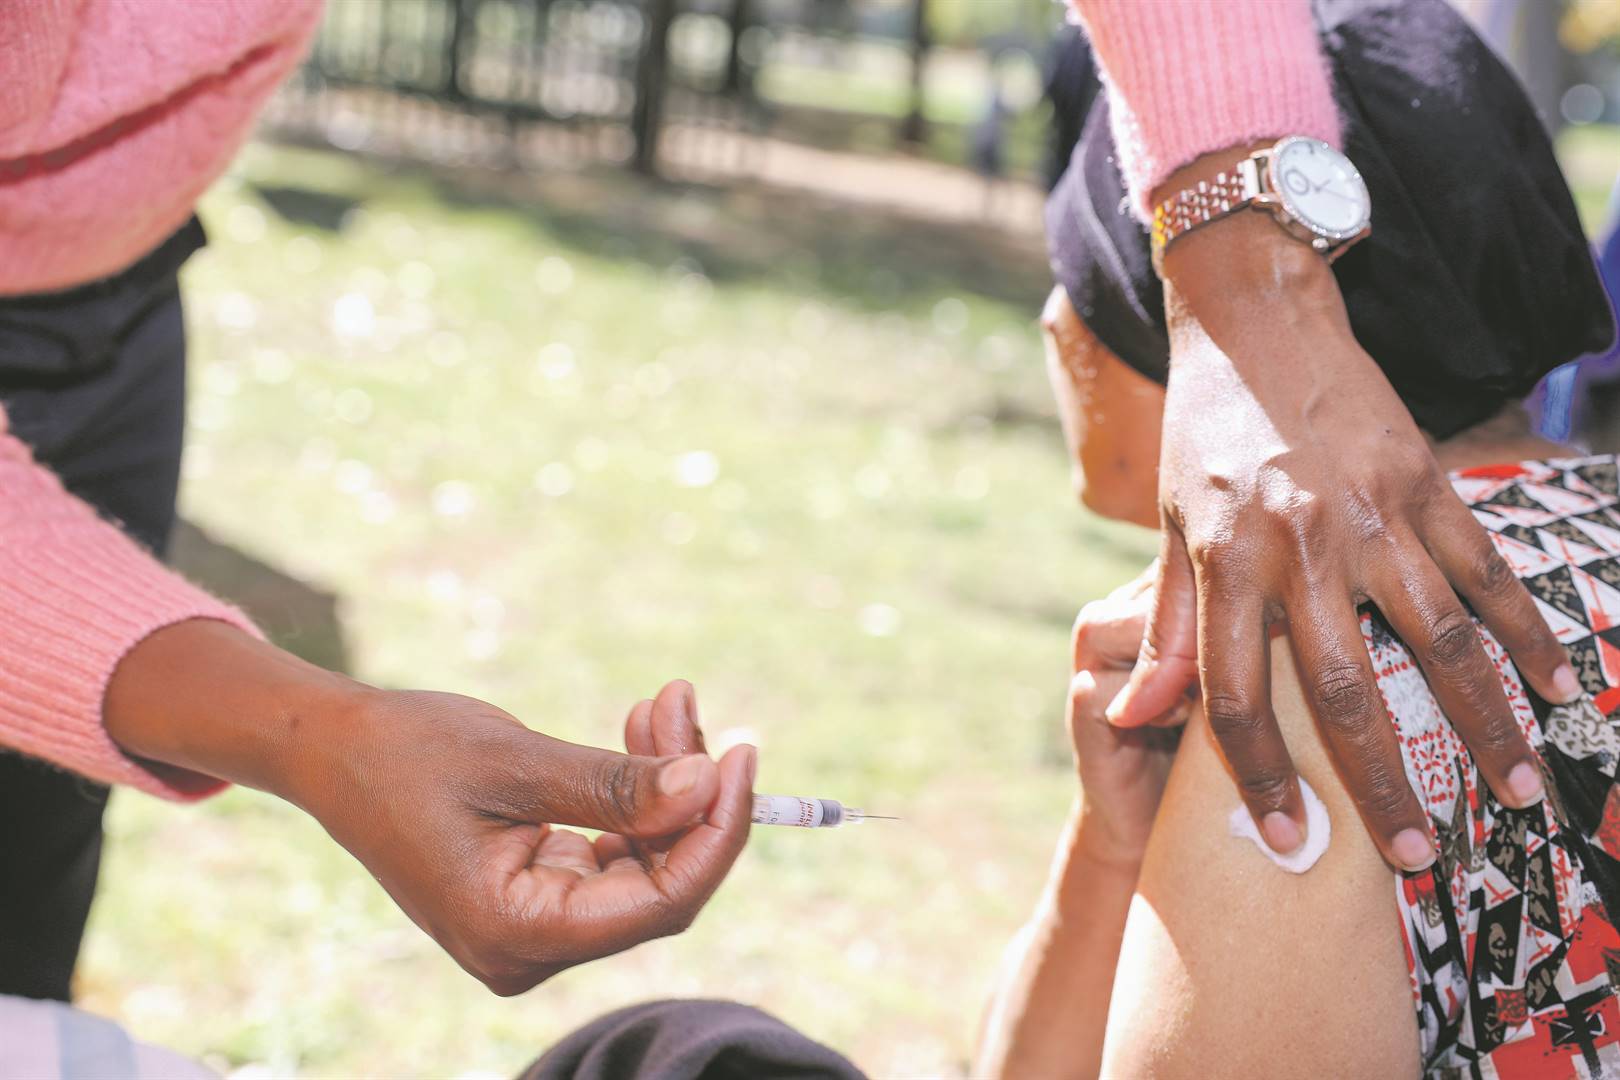 Citizens receive the flu vaccine, which is available at various public healthcare facilities across the country